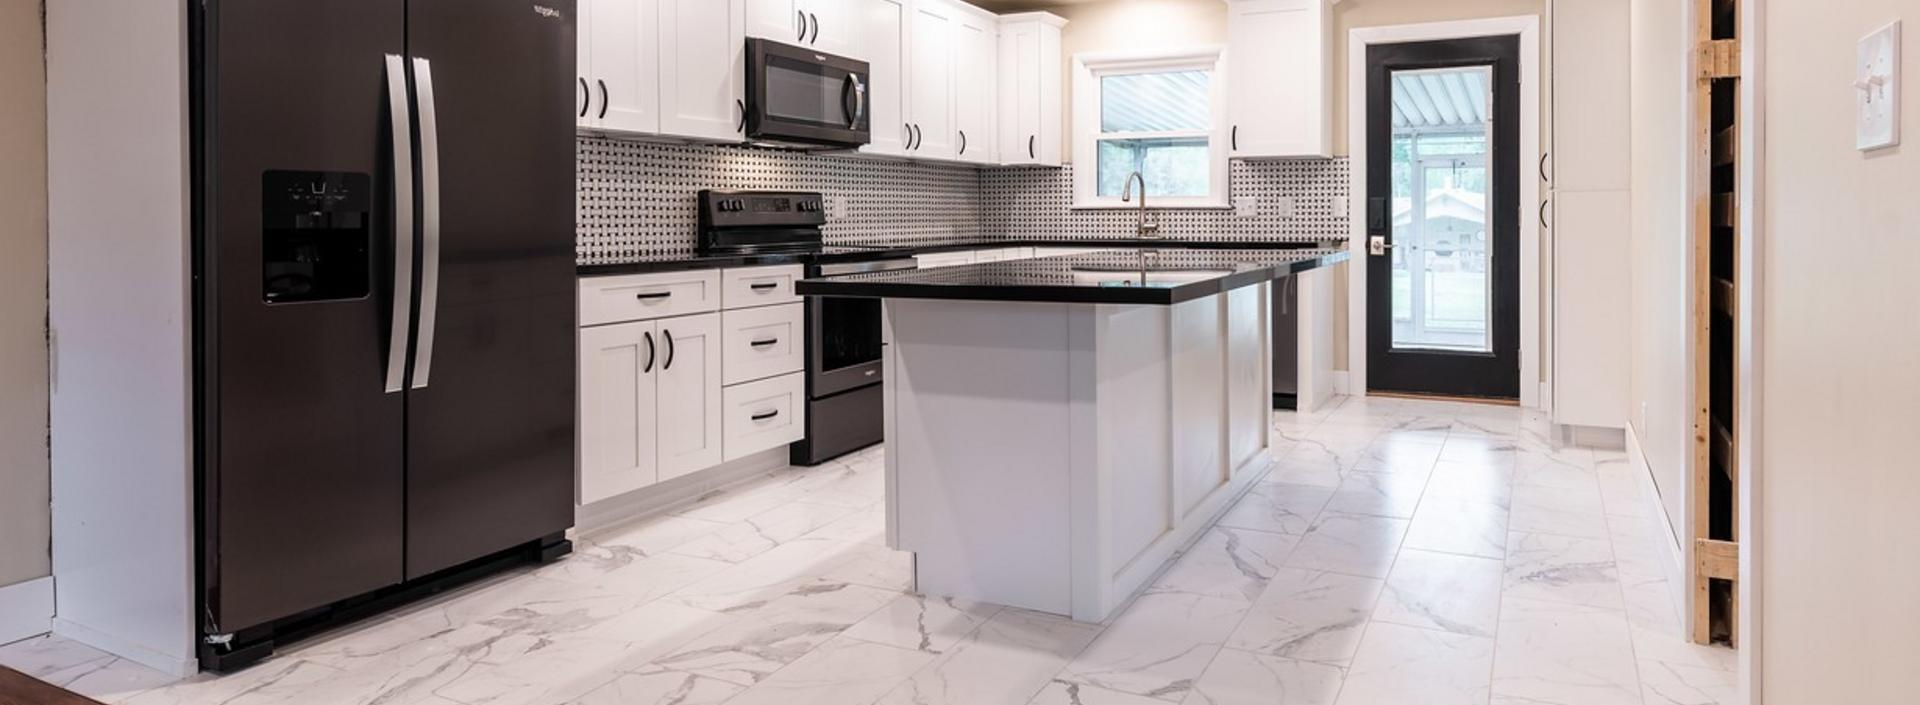 Black and white marble kitchen remodel by Creative Associates in Springfield